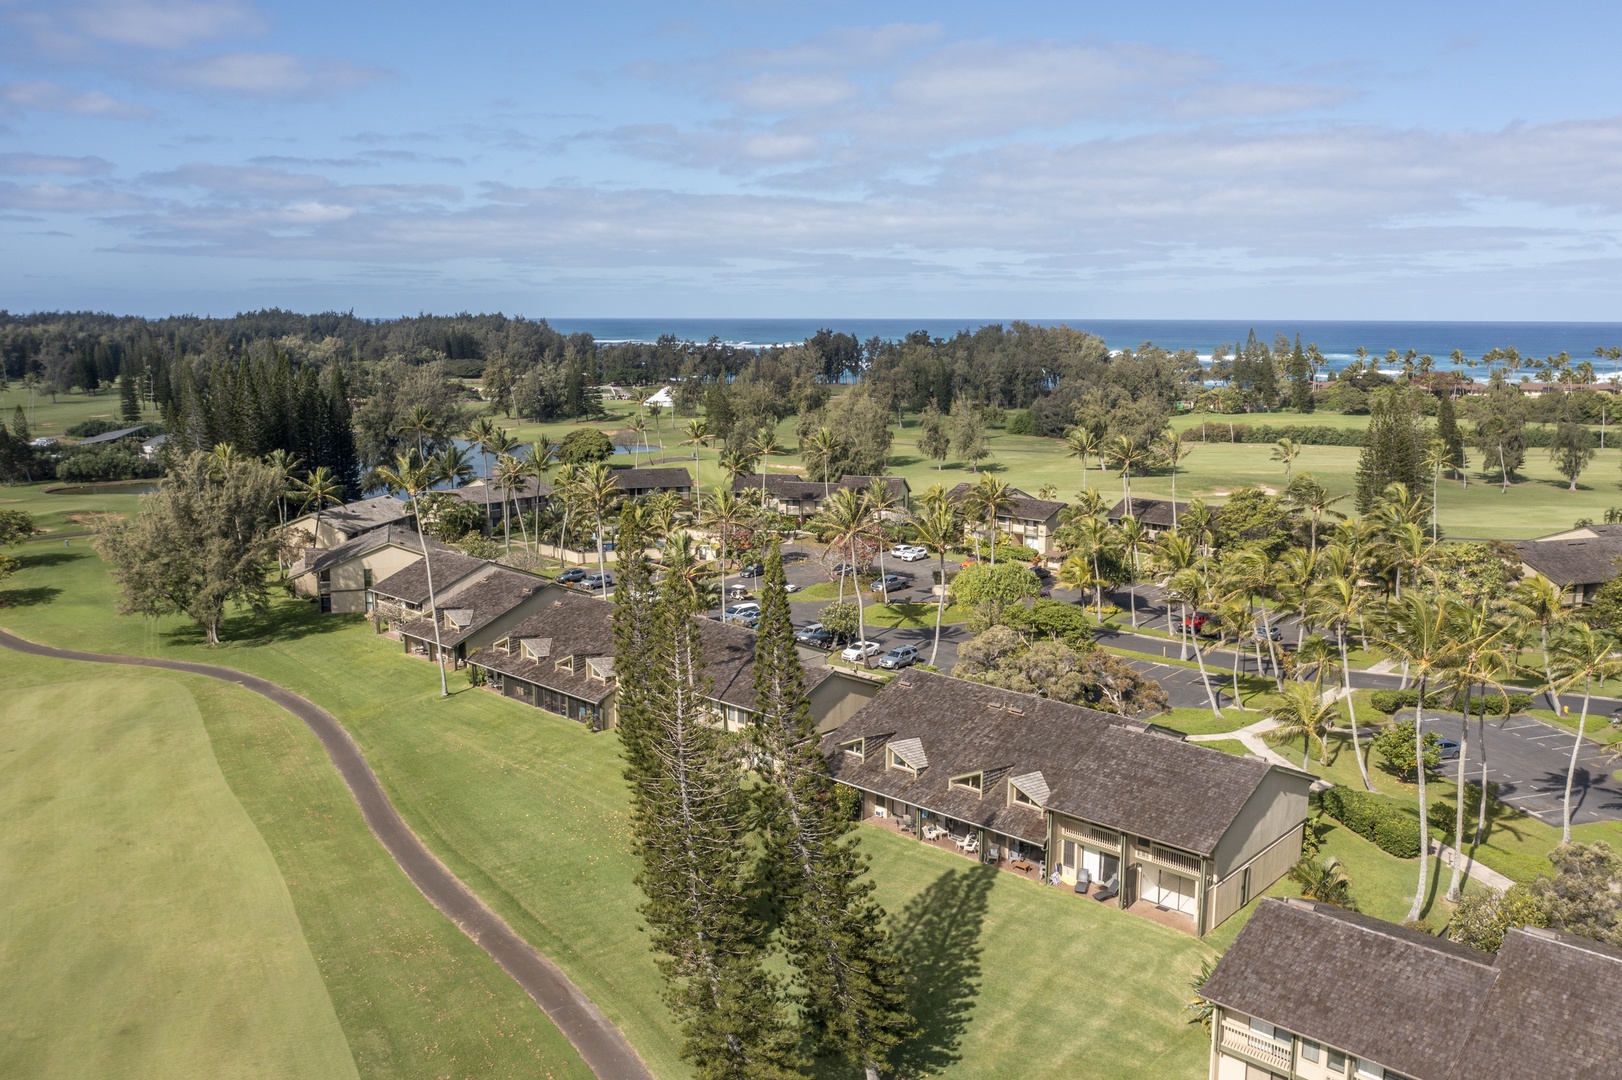 Kahuku Vacation Rentals, Pulelehua Kuilima Estates West #142 - View of the condos and adjacent golf course cart path